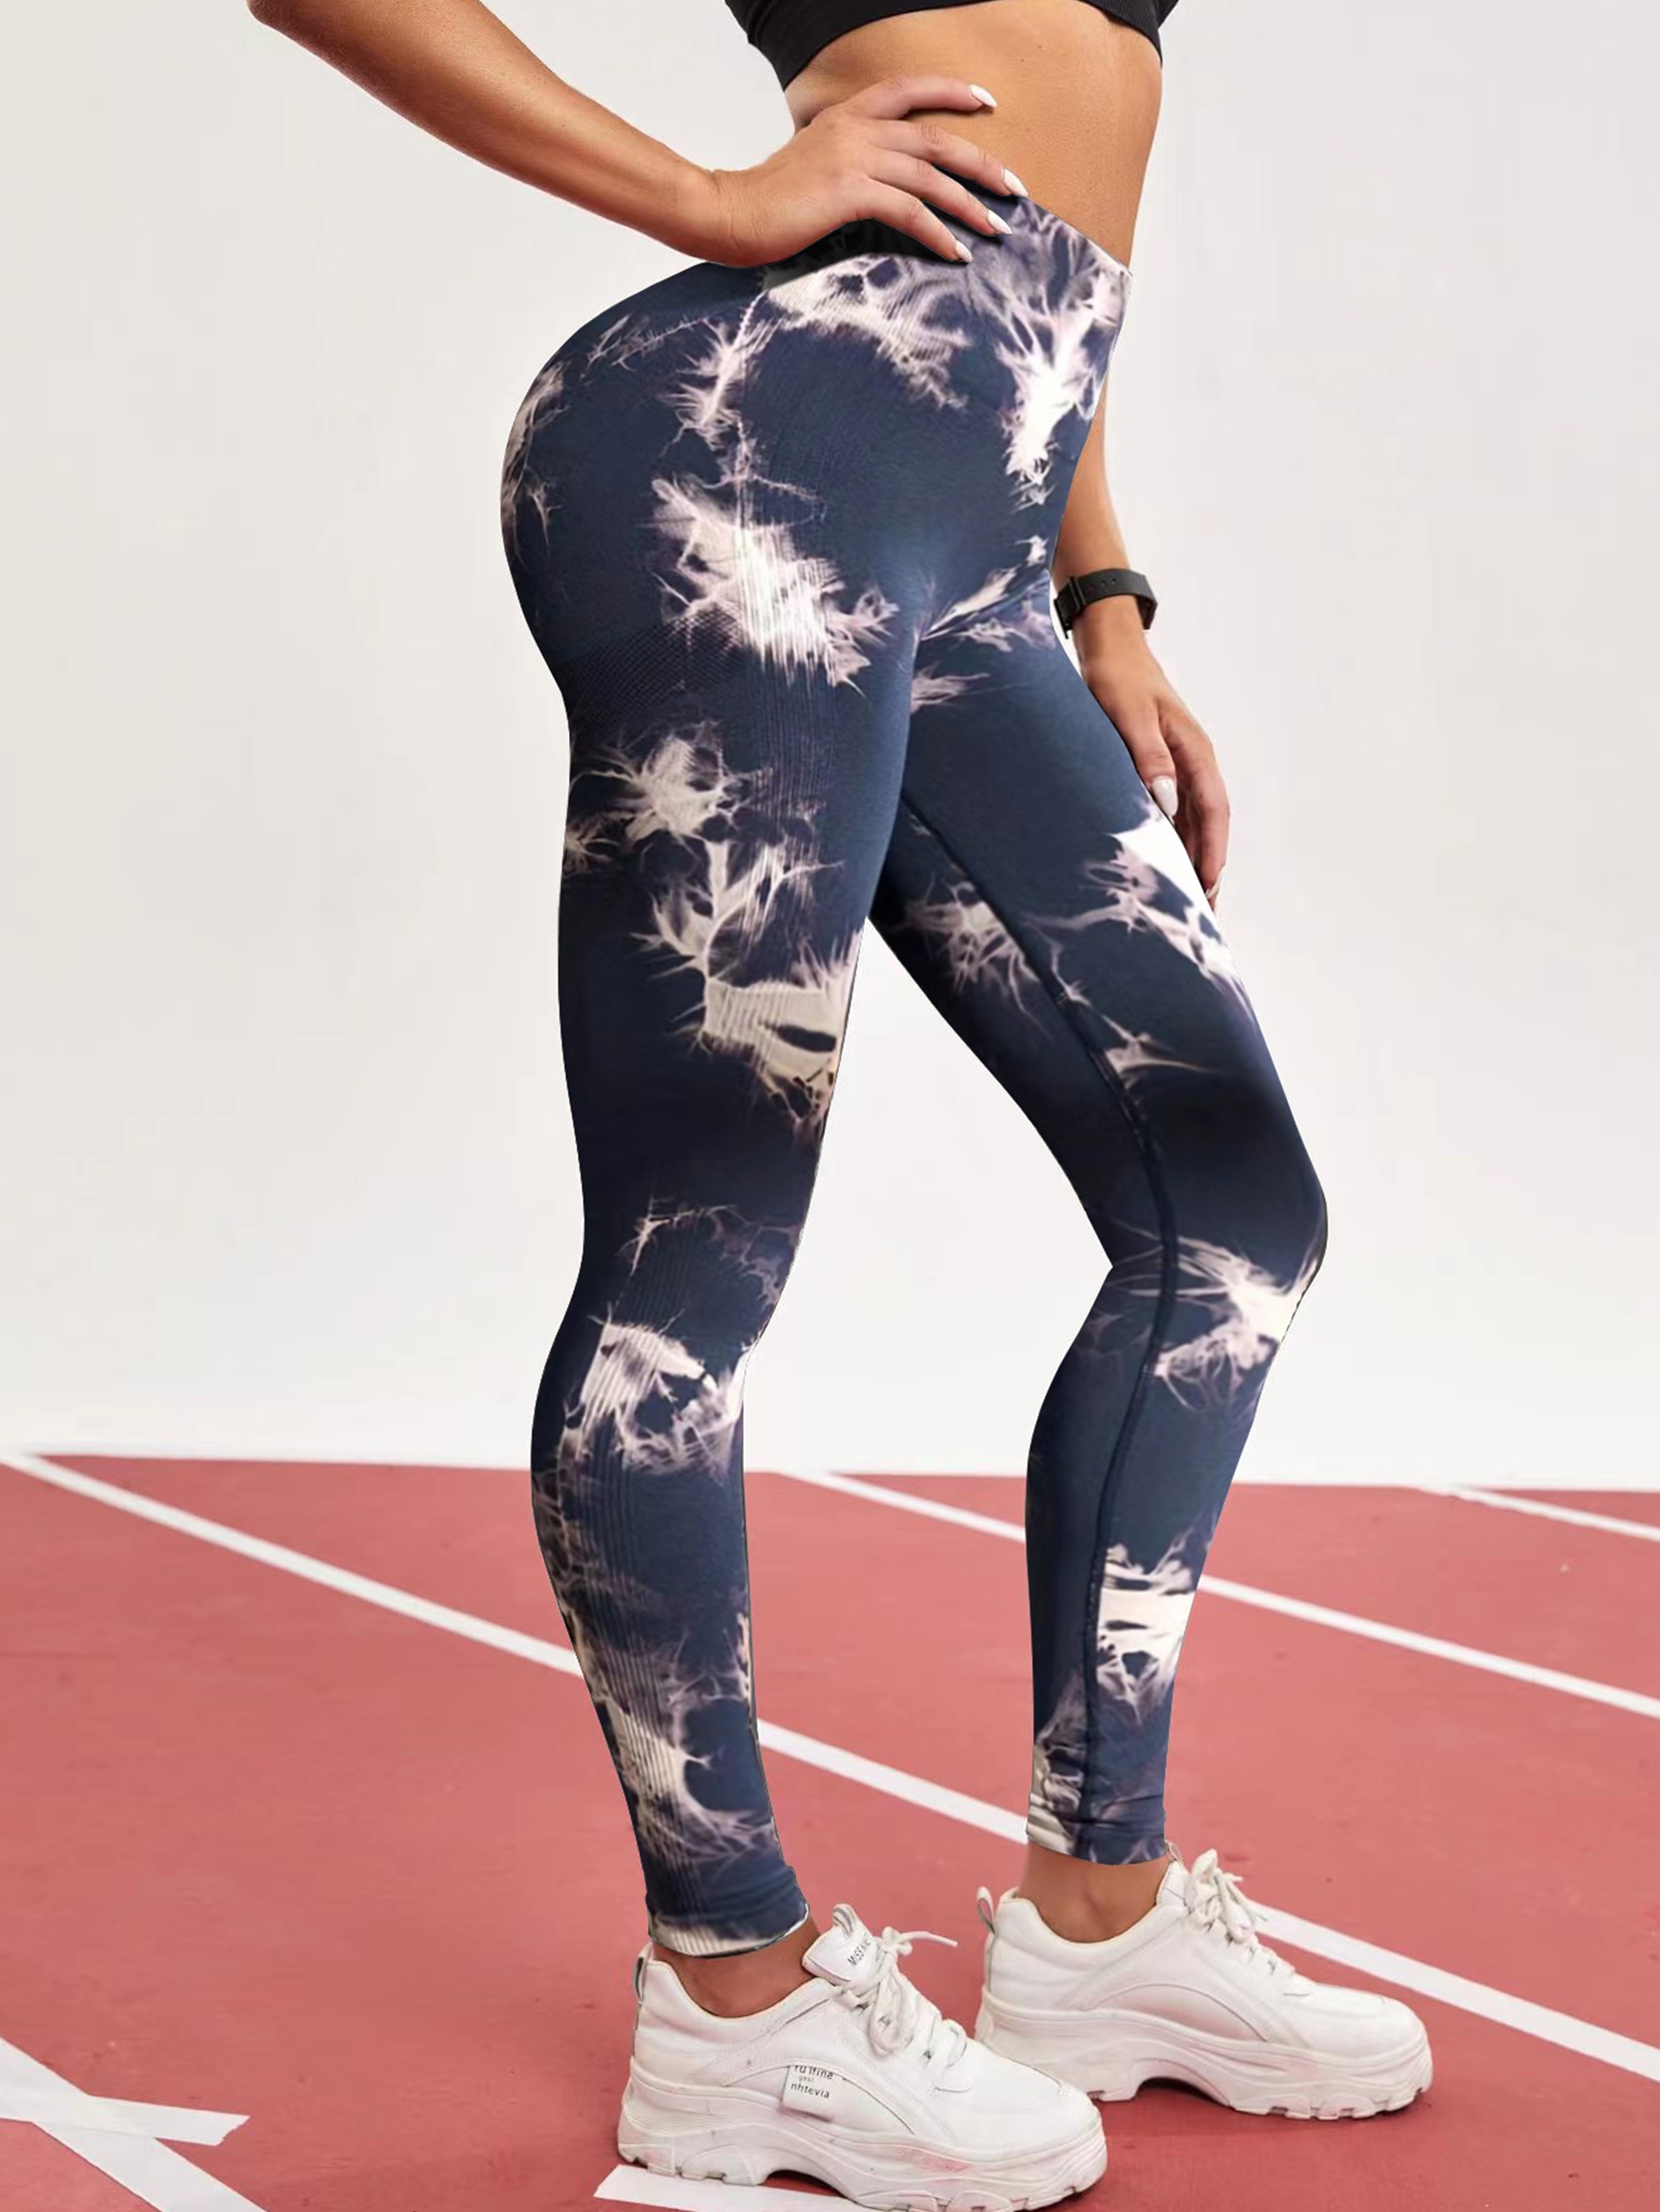 Booker Workout Leggings For Women Seamless Tie Dye And Tie Float Yoga Pants